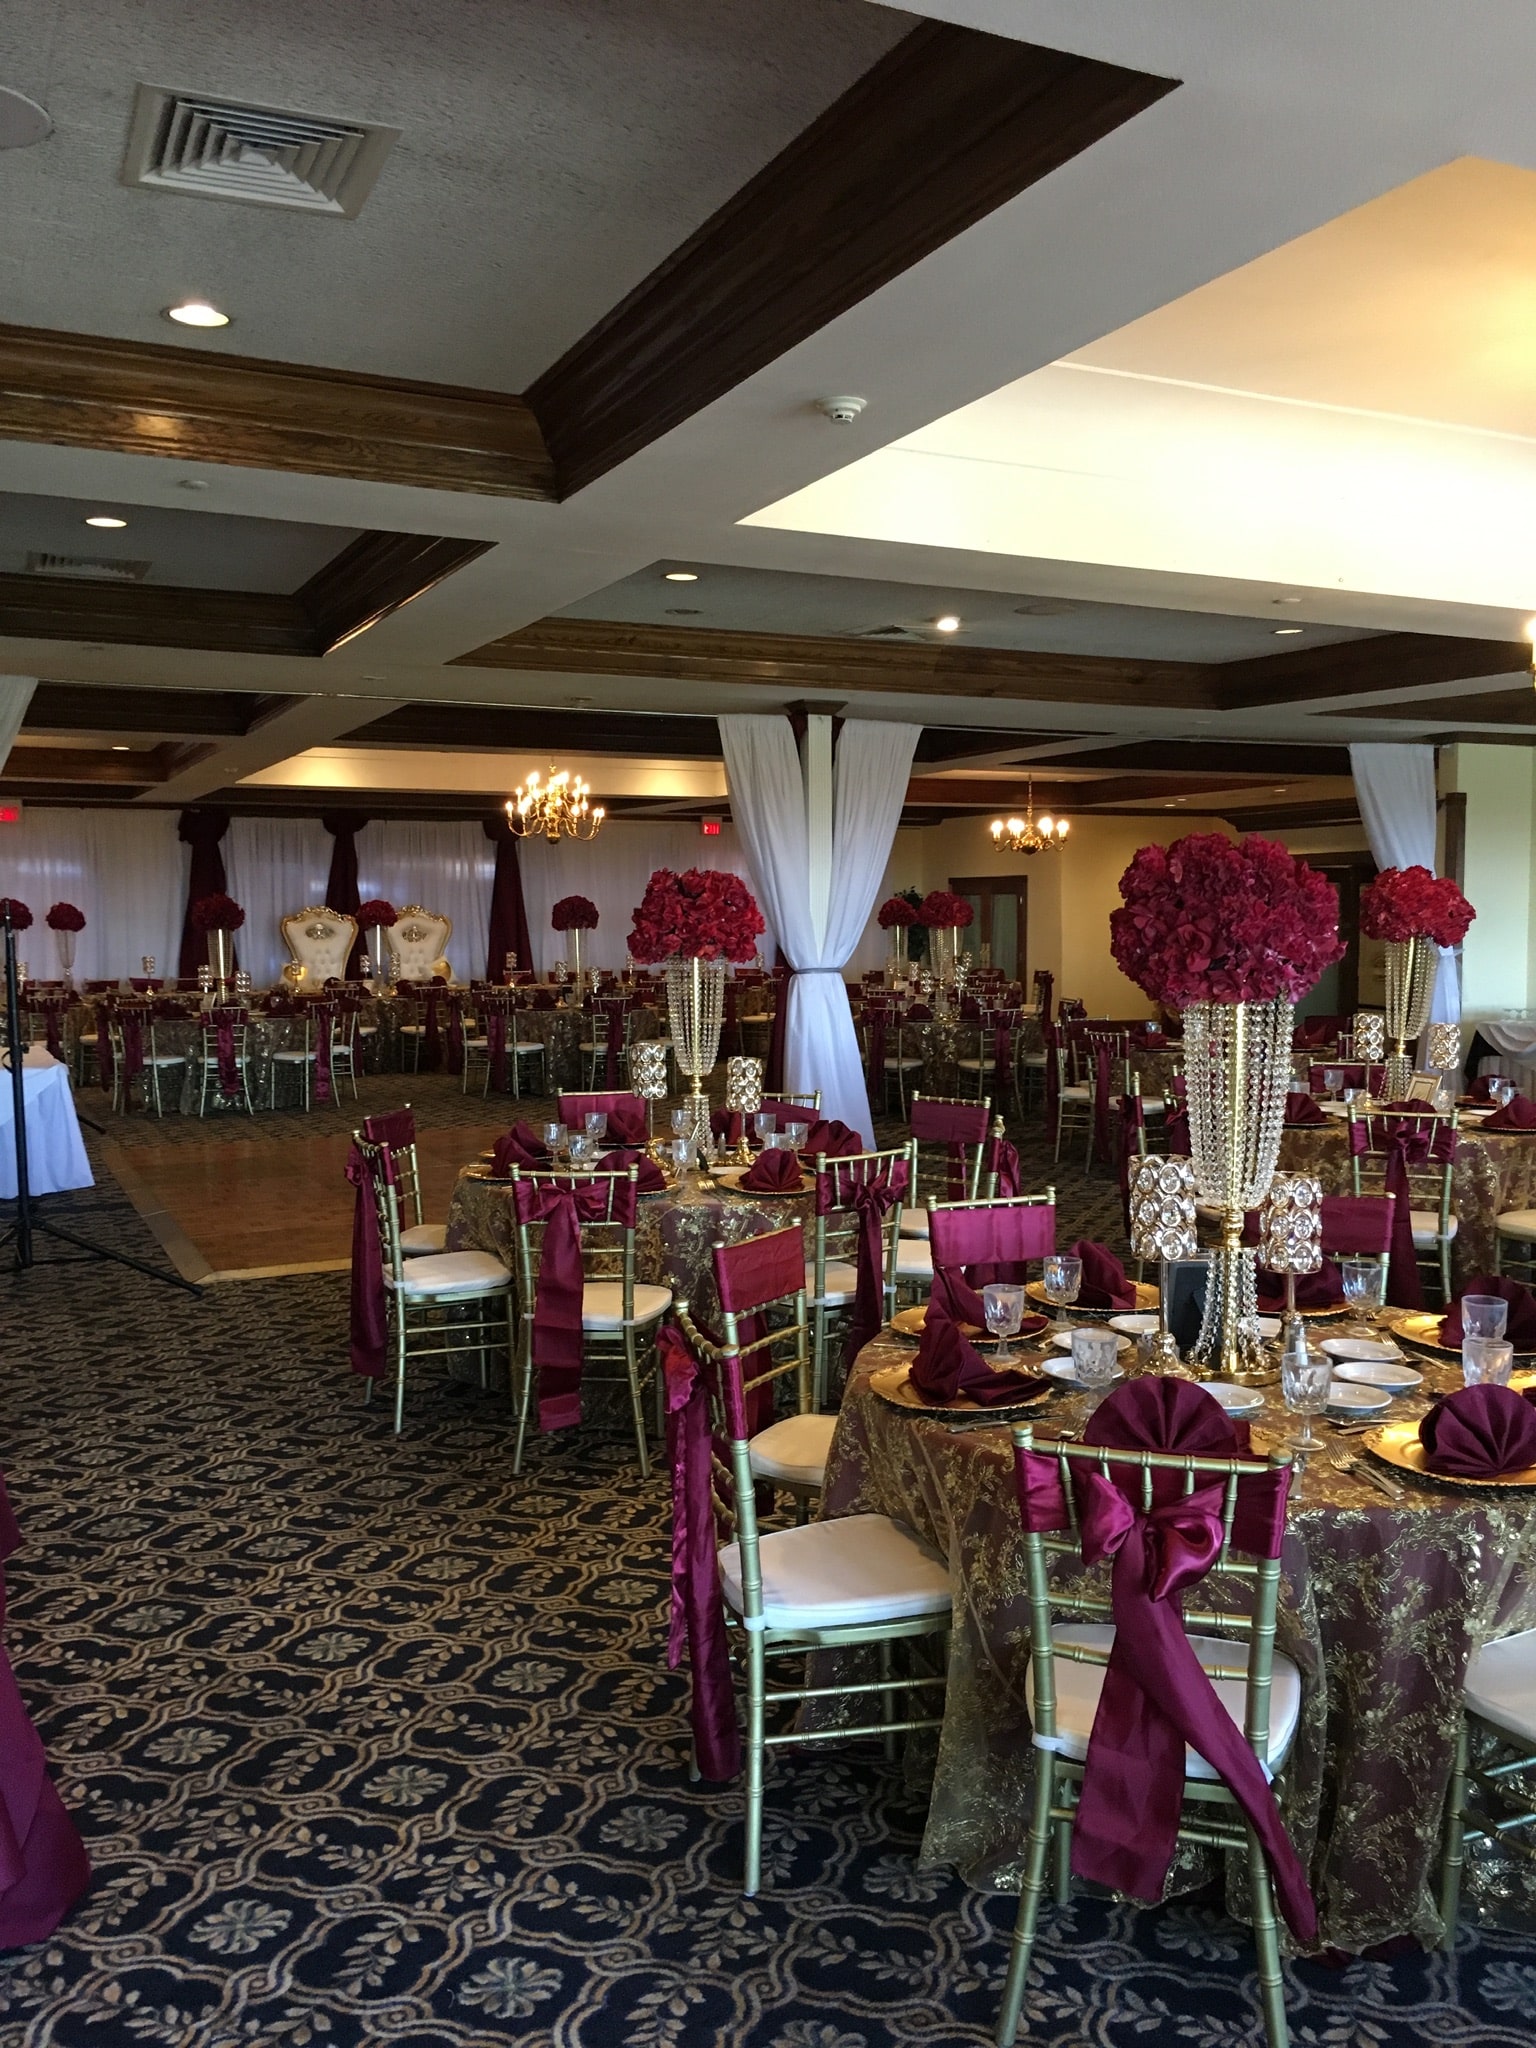 Harbor Hills Country Club - gorgeous reception hall with tray ceiling